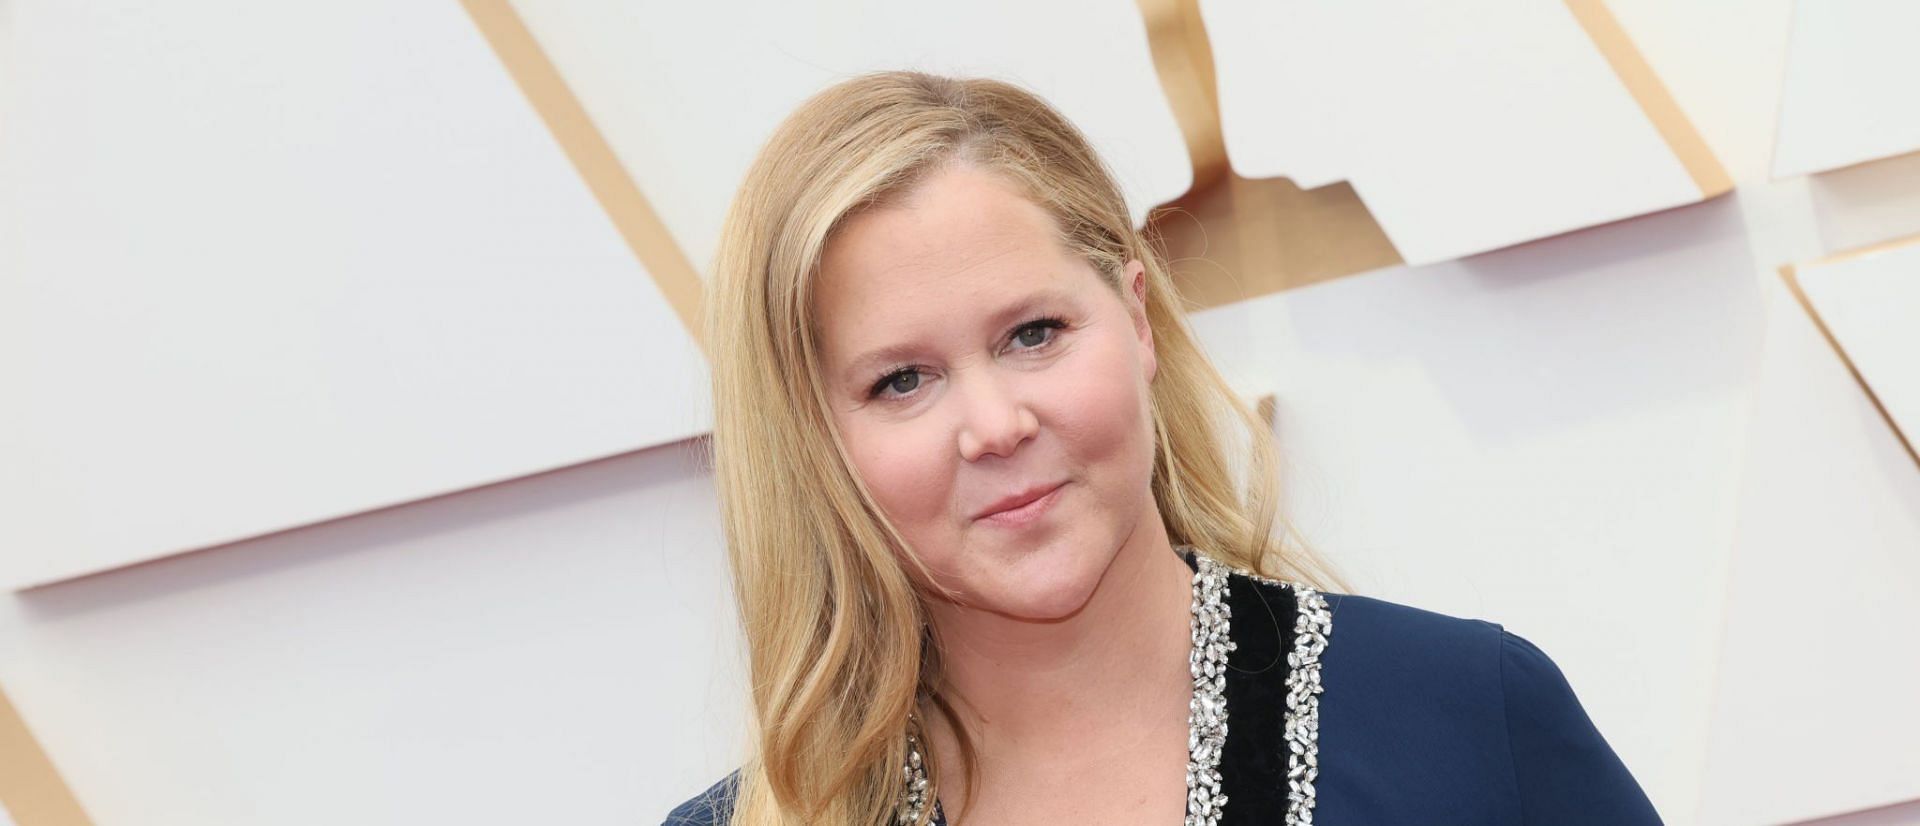 Amy Schumer was criticized after calling Kirsten Dunst a &quot;seat-filler&quot; at the 2022 Oscars (Image via David Livingston/Getty Images)